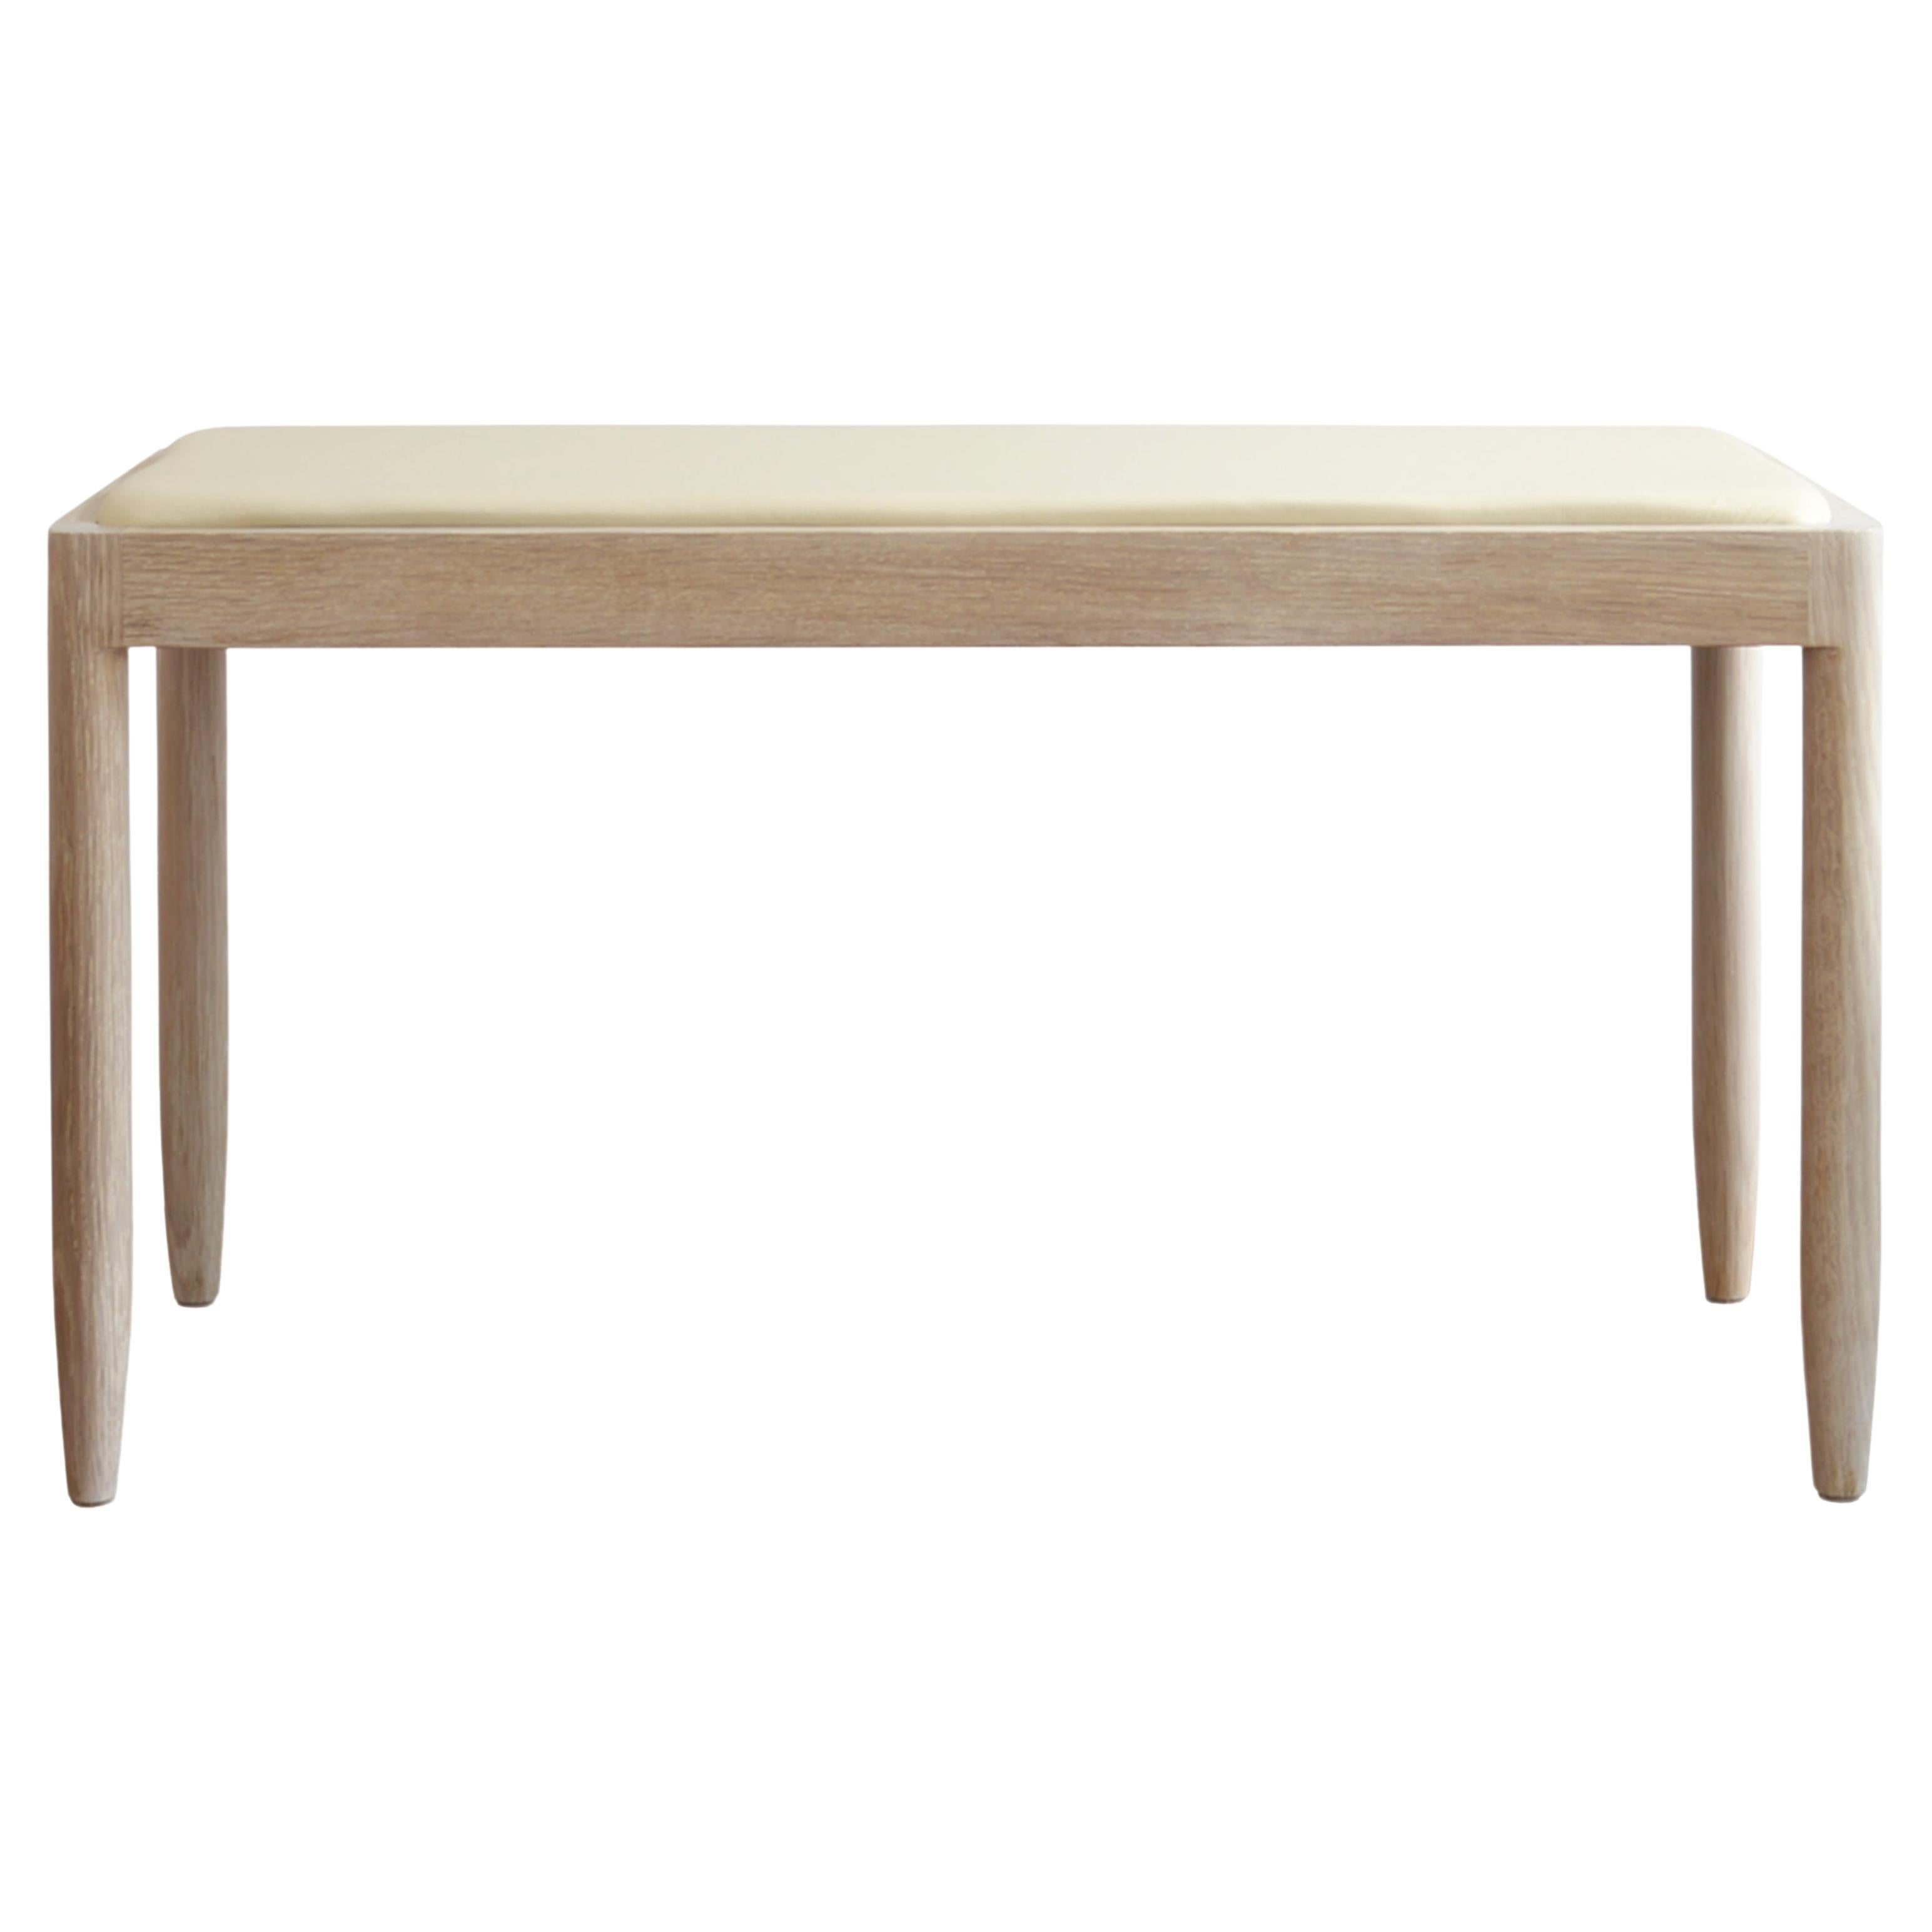 Modern  Leather Upholstered Bench in Bleached White Oak by Hachi Collections For Sale